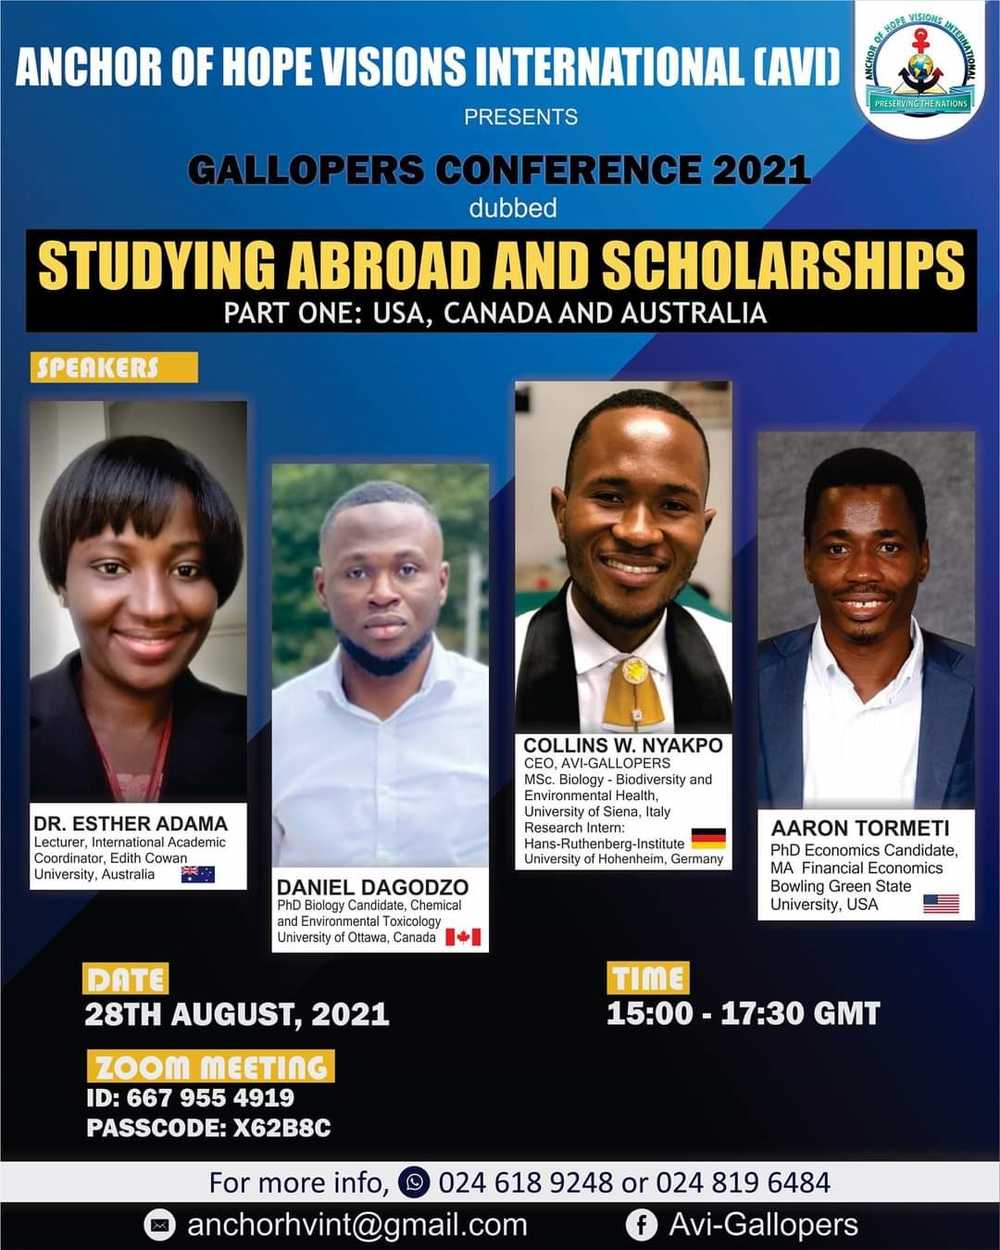 Gallopers Conference dubbed STUDYING ABROAD AND SCHOLARSHIPS: PART ONE; USA, CANADA AND AUSTRALIA on 28th August 2021 (Ghana virtual).